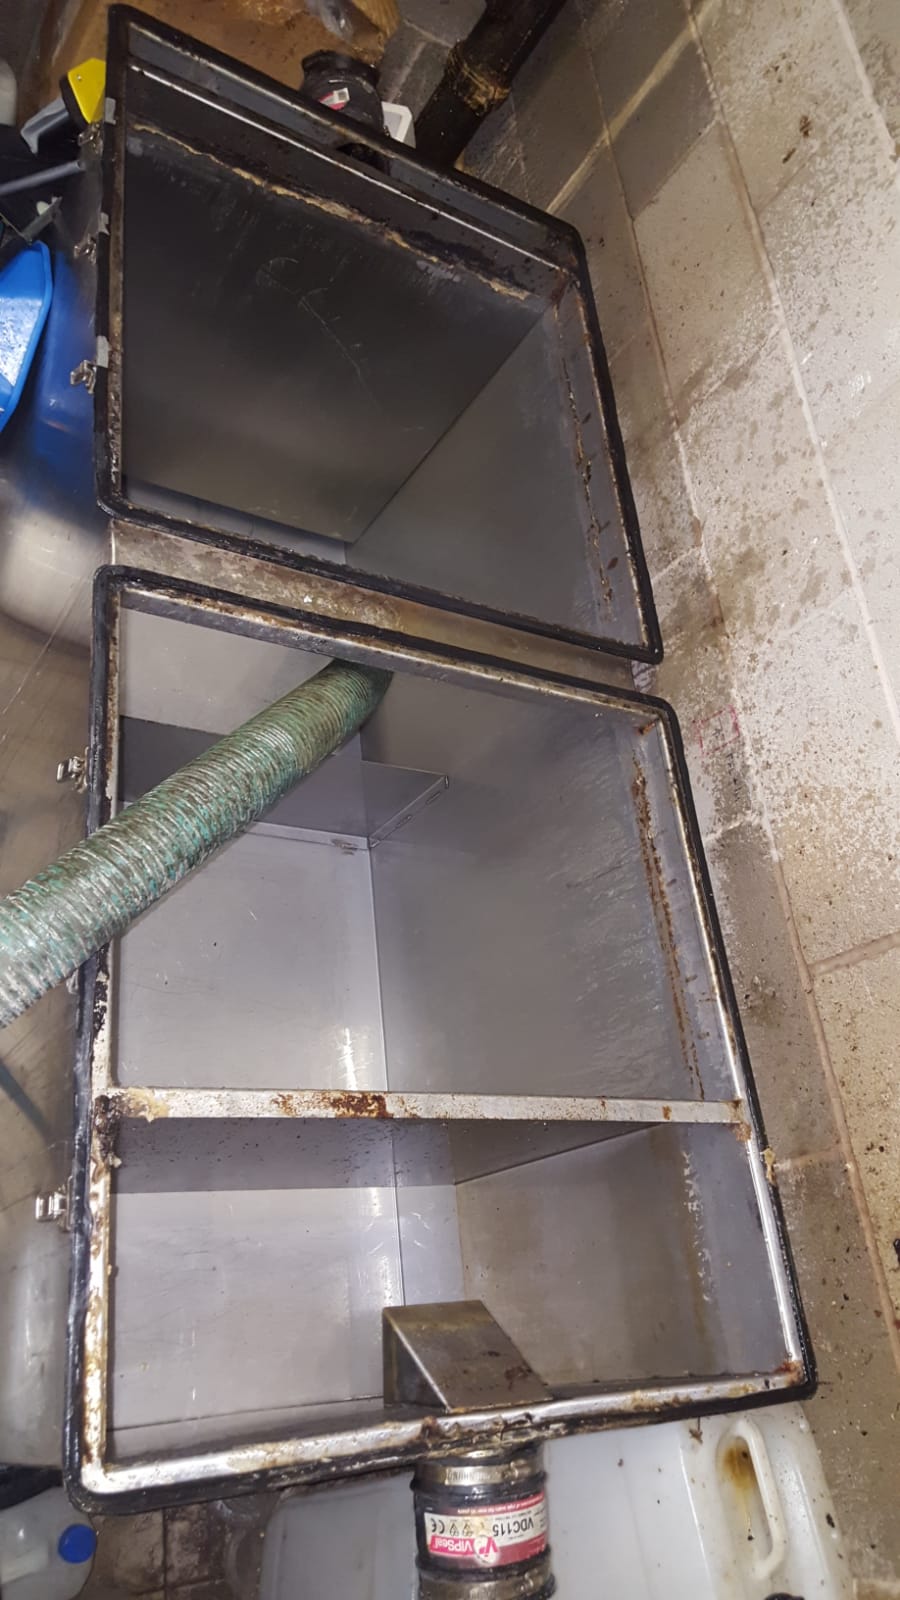 Grease Trap Emptying – Fats, Oils and Grease Management – Manchester